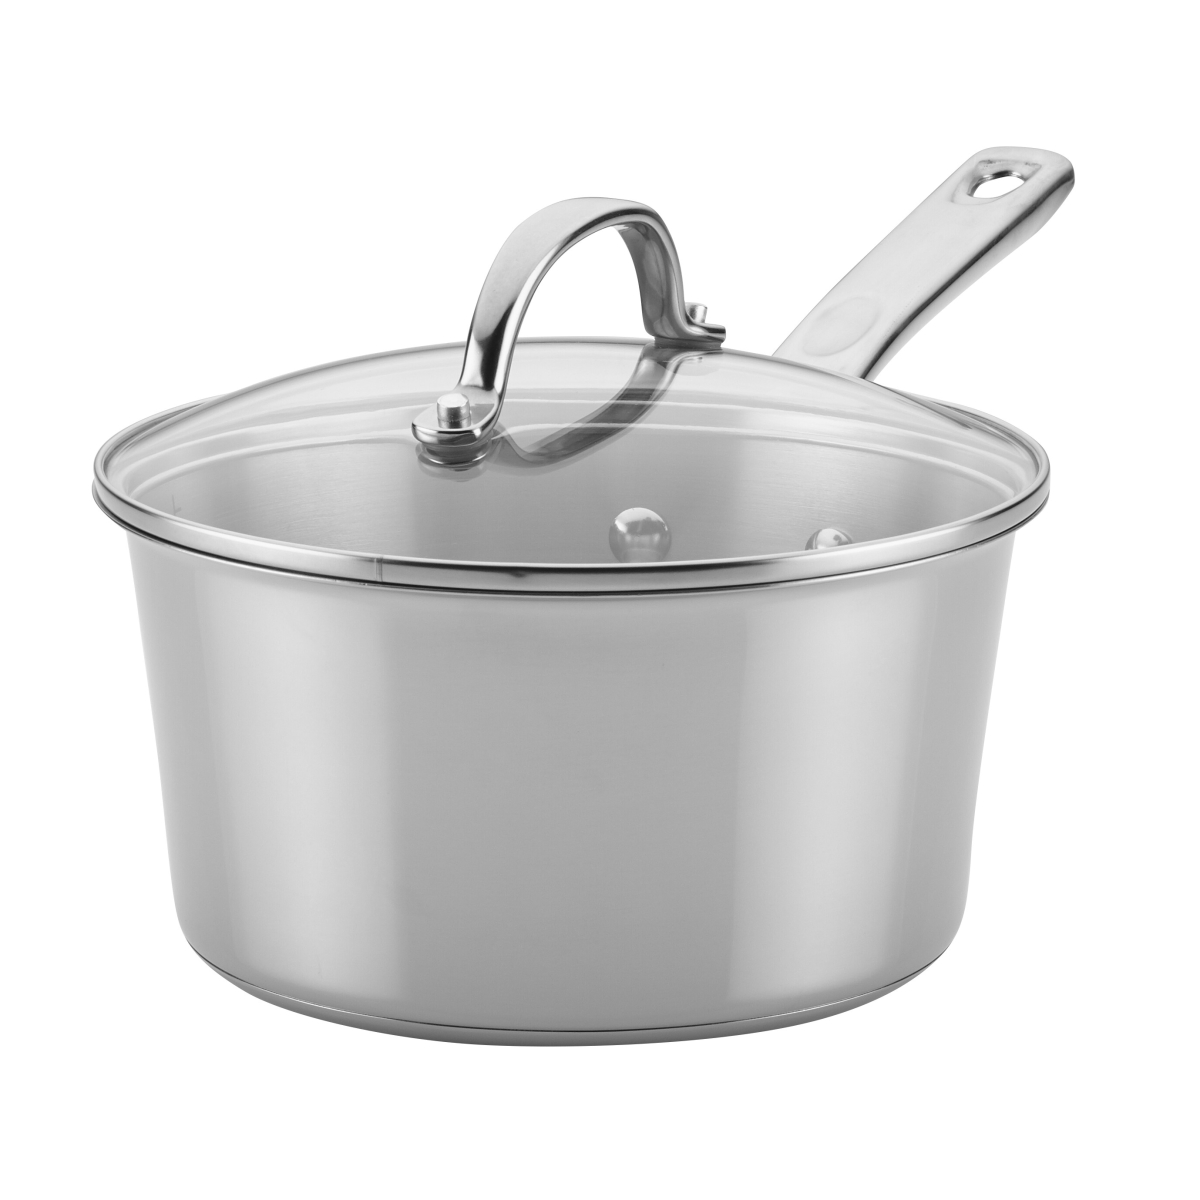 70203 Stainless Steel Covered Saucepan, 3 Qt.